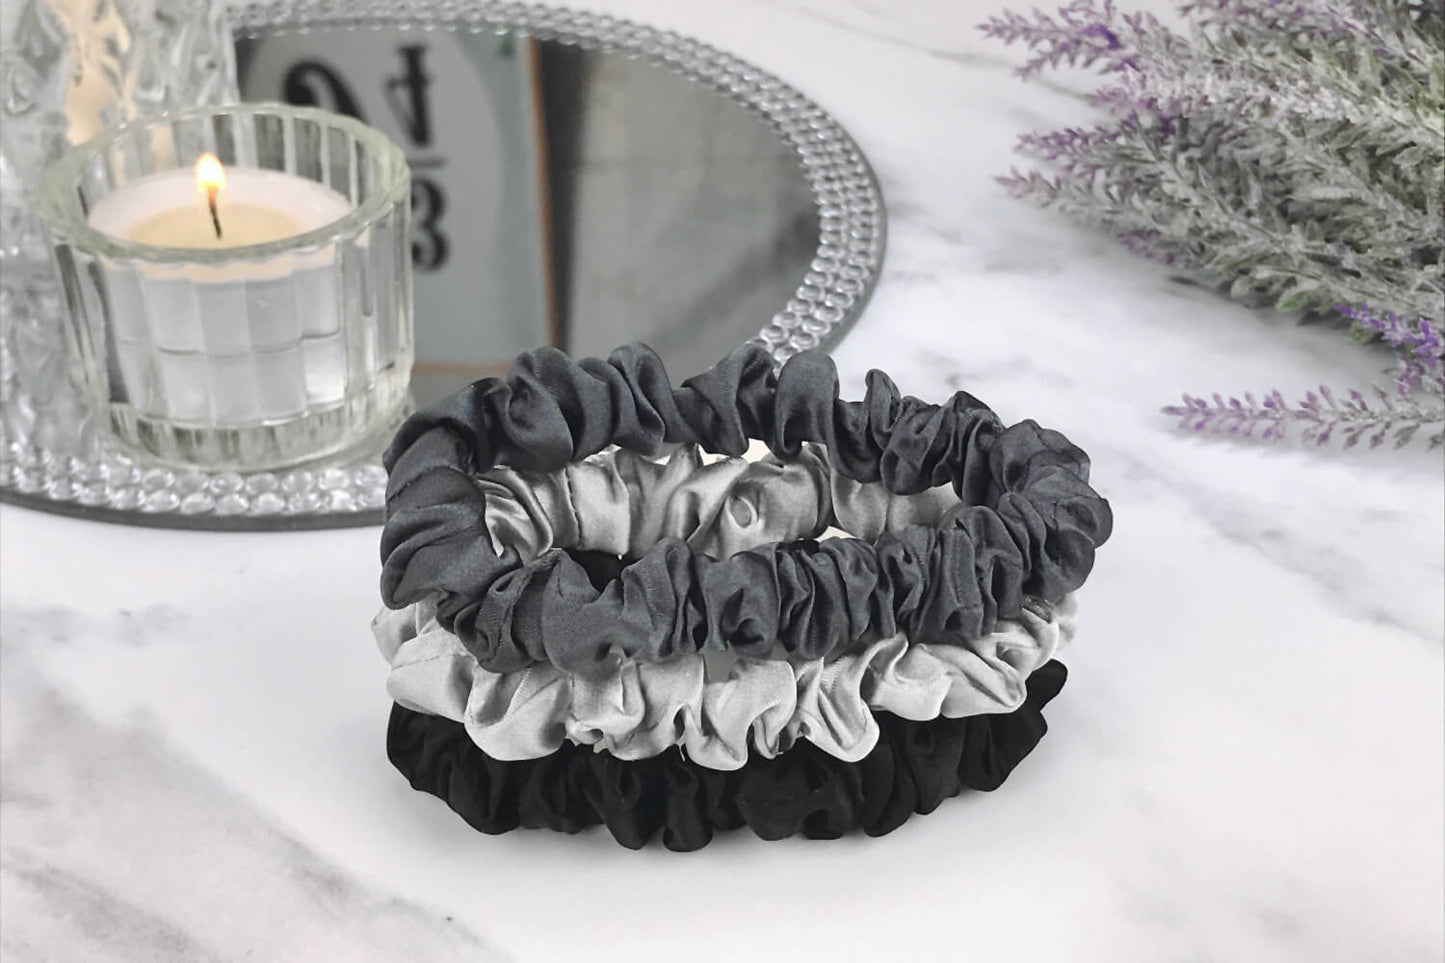 Celestial Silk skinny charcoal black and silver silk scrunchies stacked on marble counter with lavender plant and a candle in the background